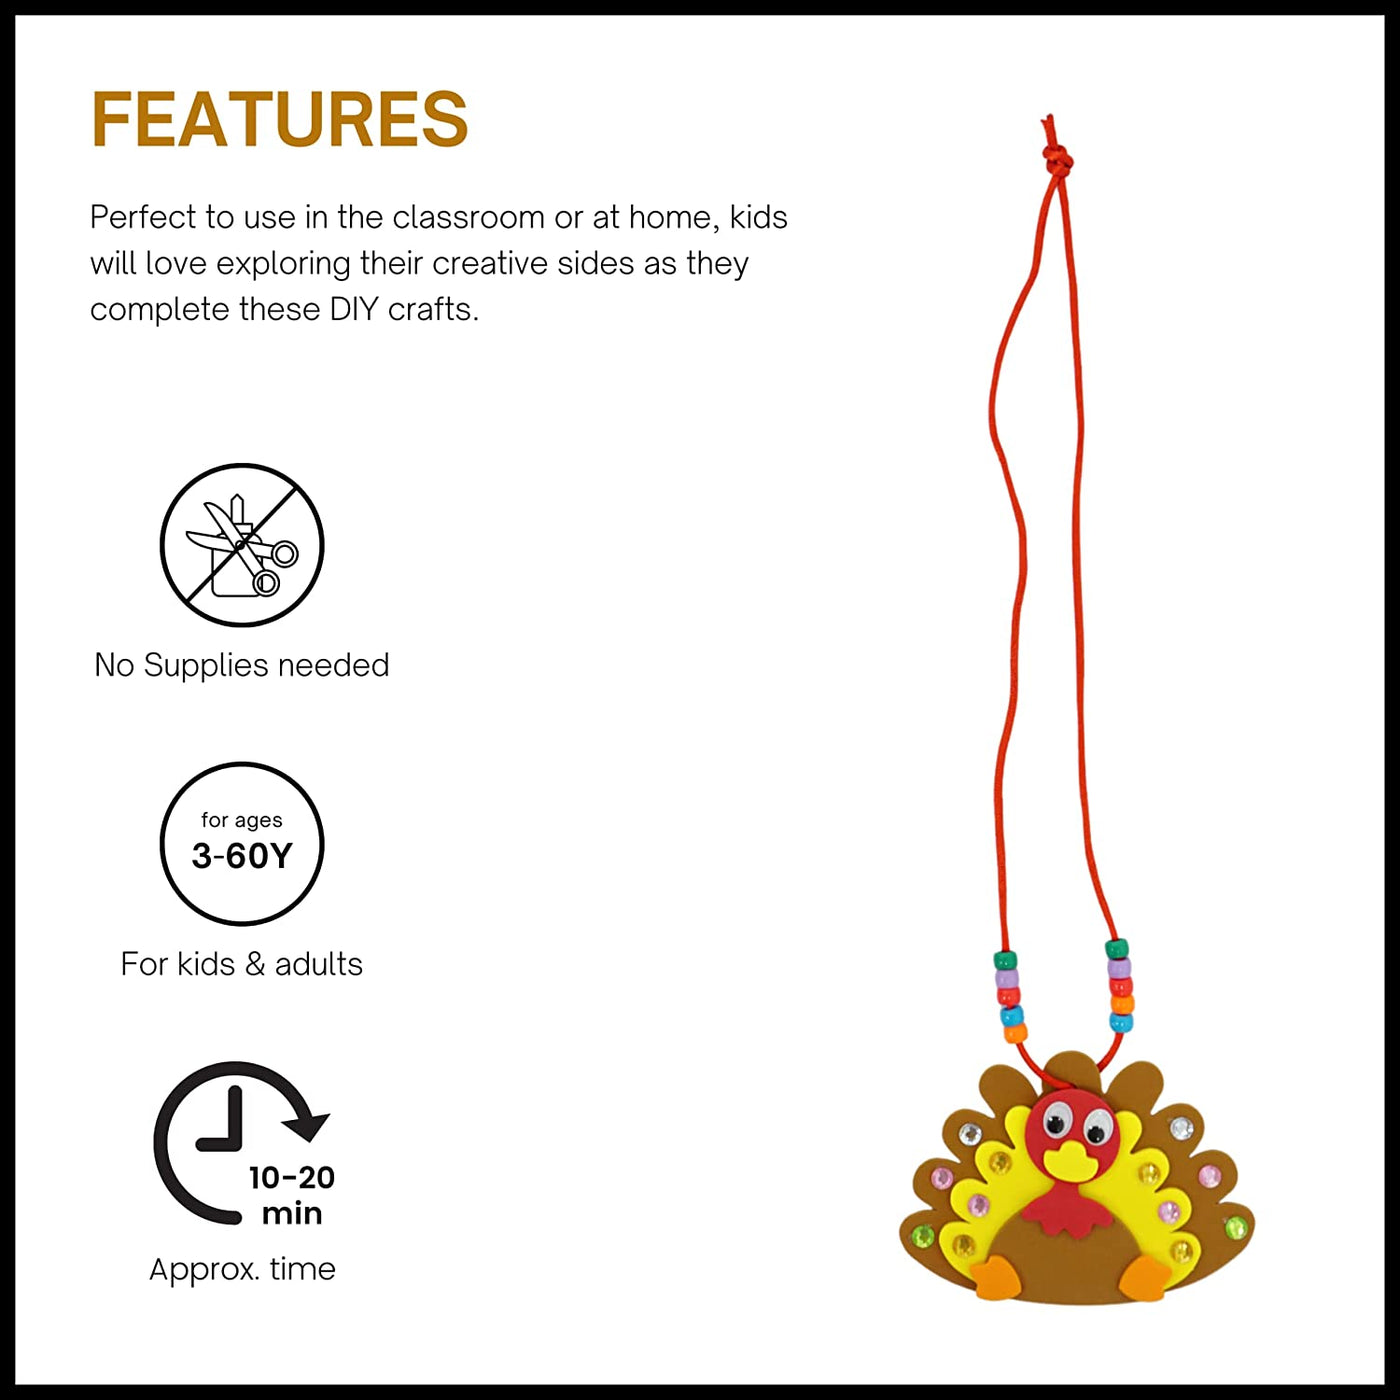 4E's Novelty Thanksgiving Turkey Necklaces Crafts for Kids (12 Pack) Bulk DIY Thanksgiving Game Activity